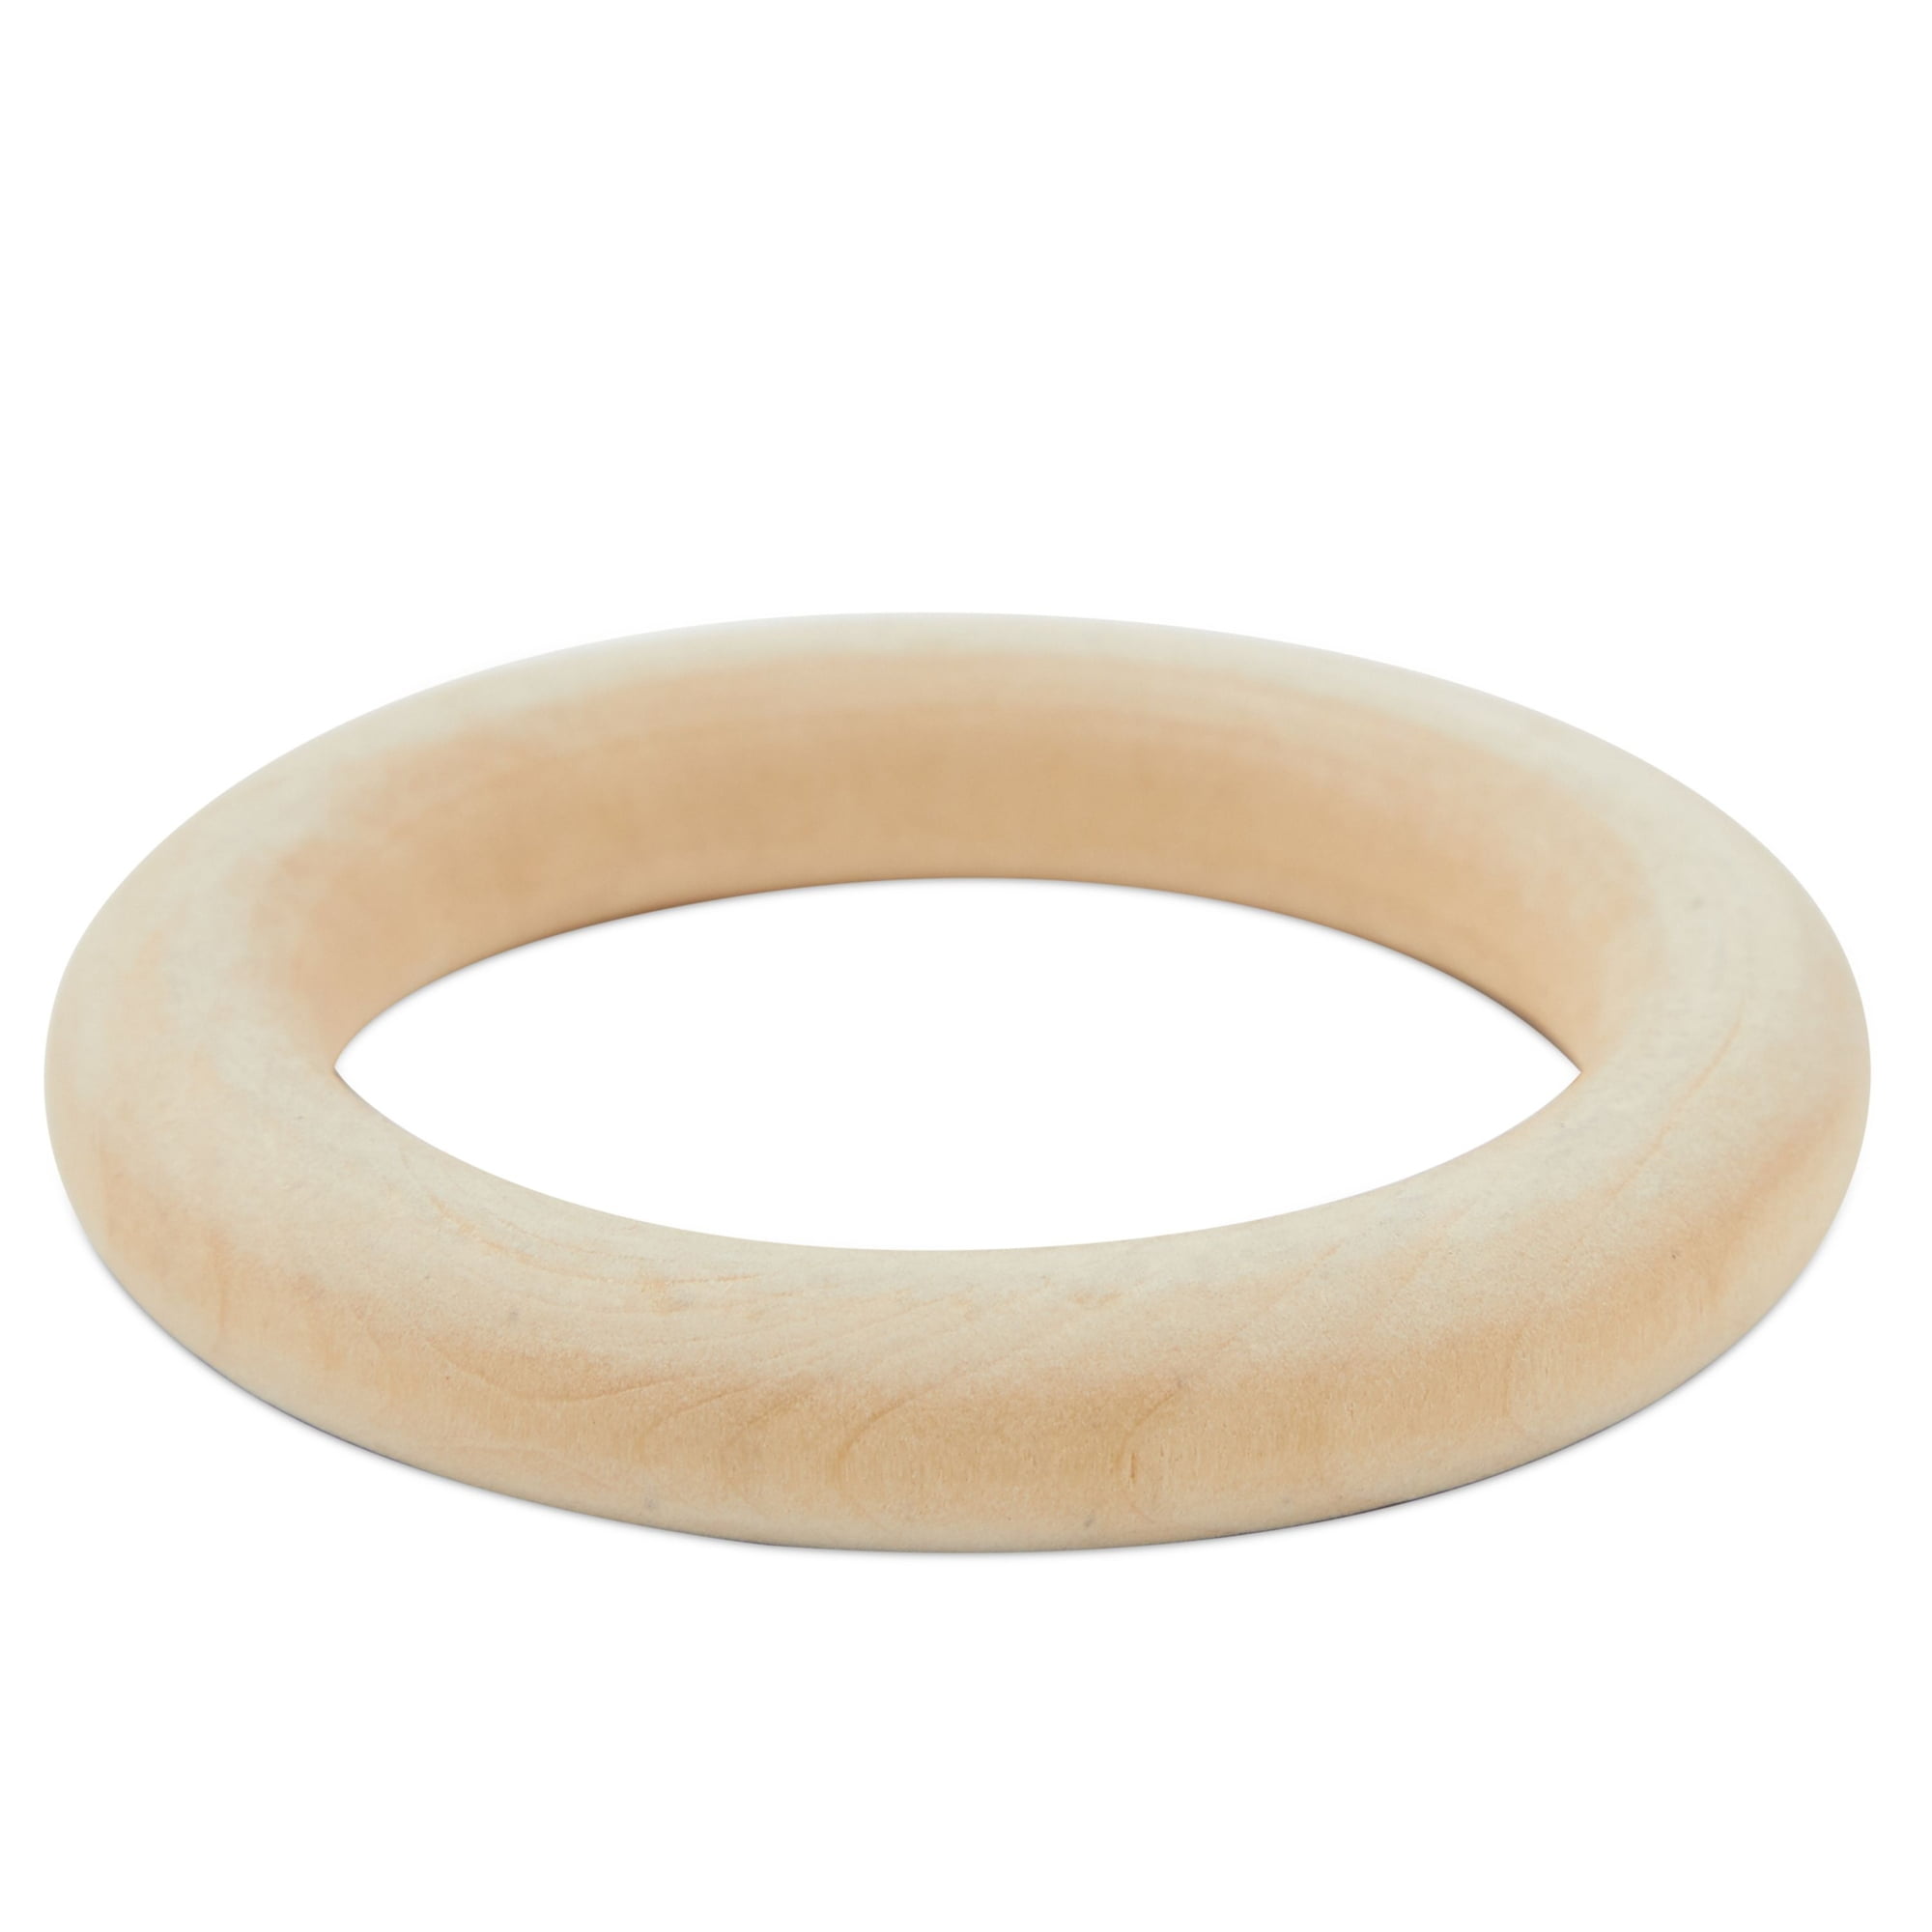 Wooden Rings for Crafts, Macrame, Crochet, Jewelry Making, Natural Unfinished 3 inch Wood Rings (75mm, 30 Pack)